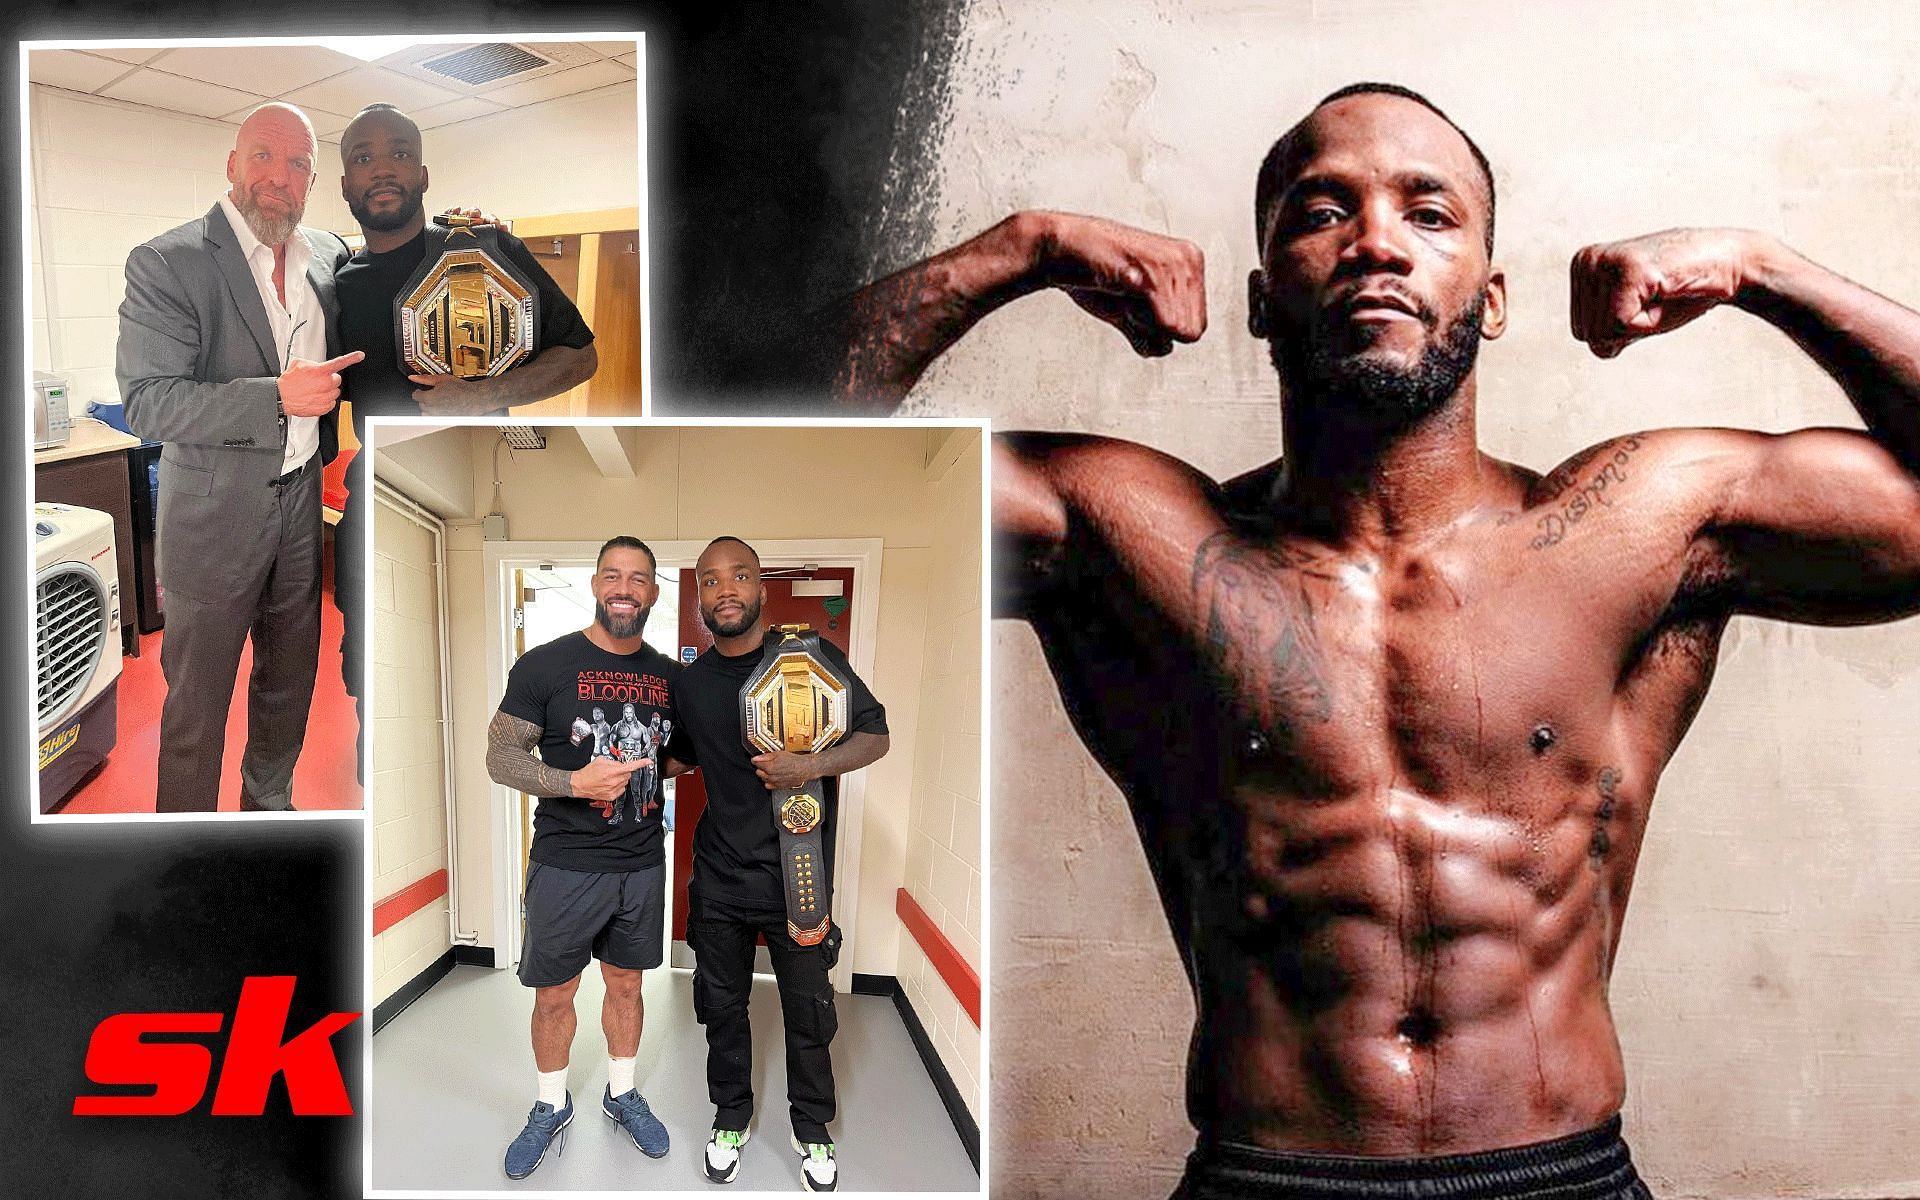 Leon Edwards (right) with Roman Reigns (center) and with Triple H (left). [Images courtesy: all images from Instagram @leonedwardsmma]